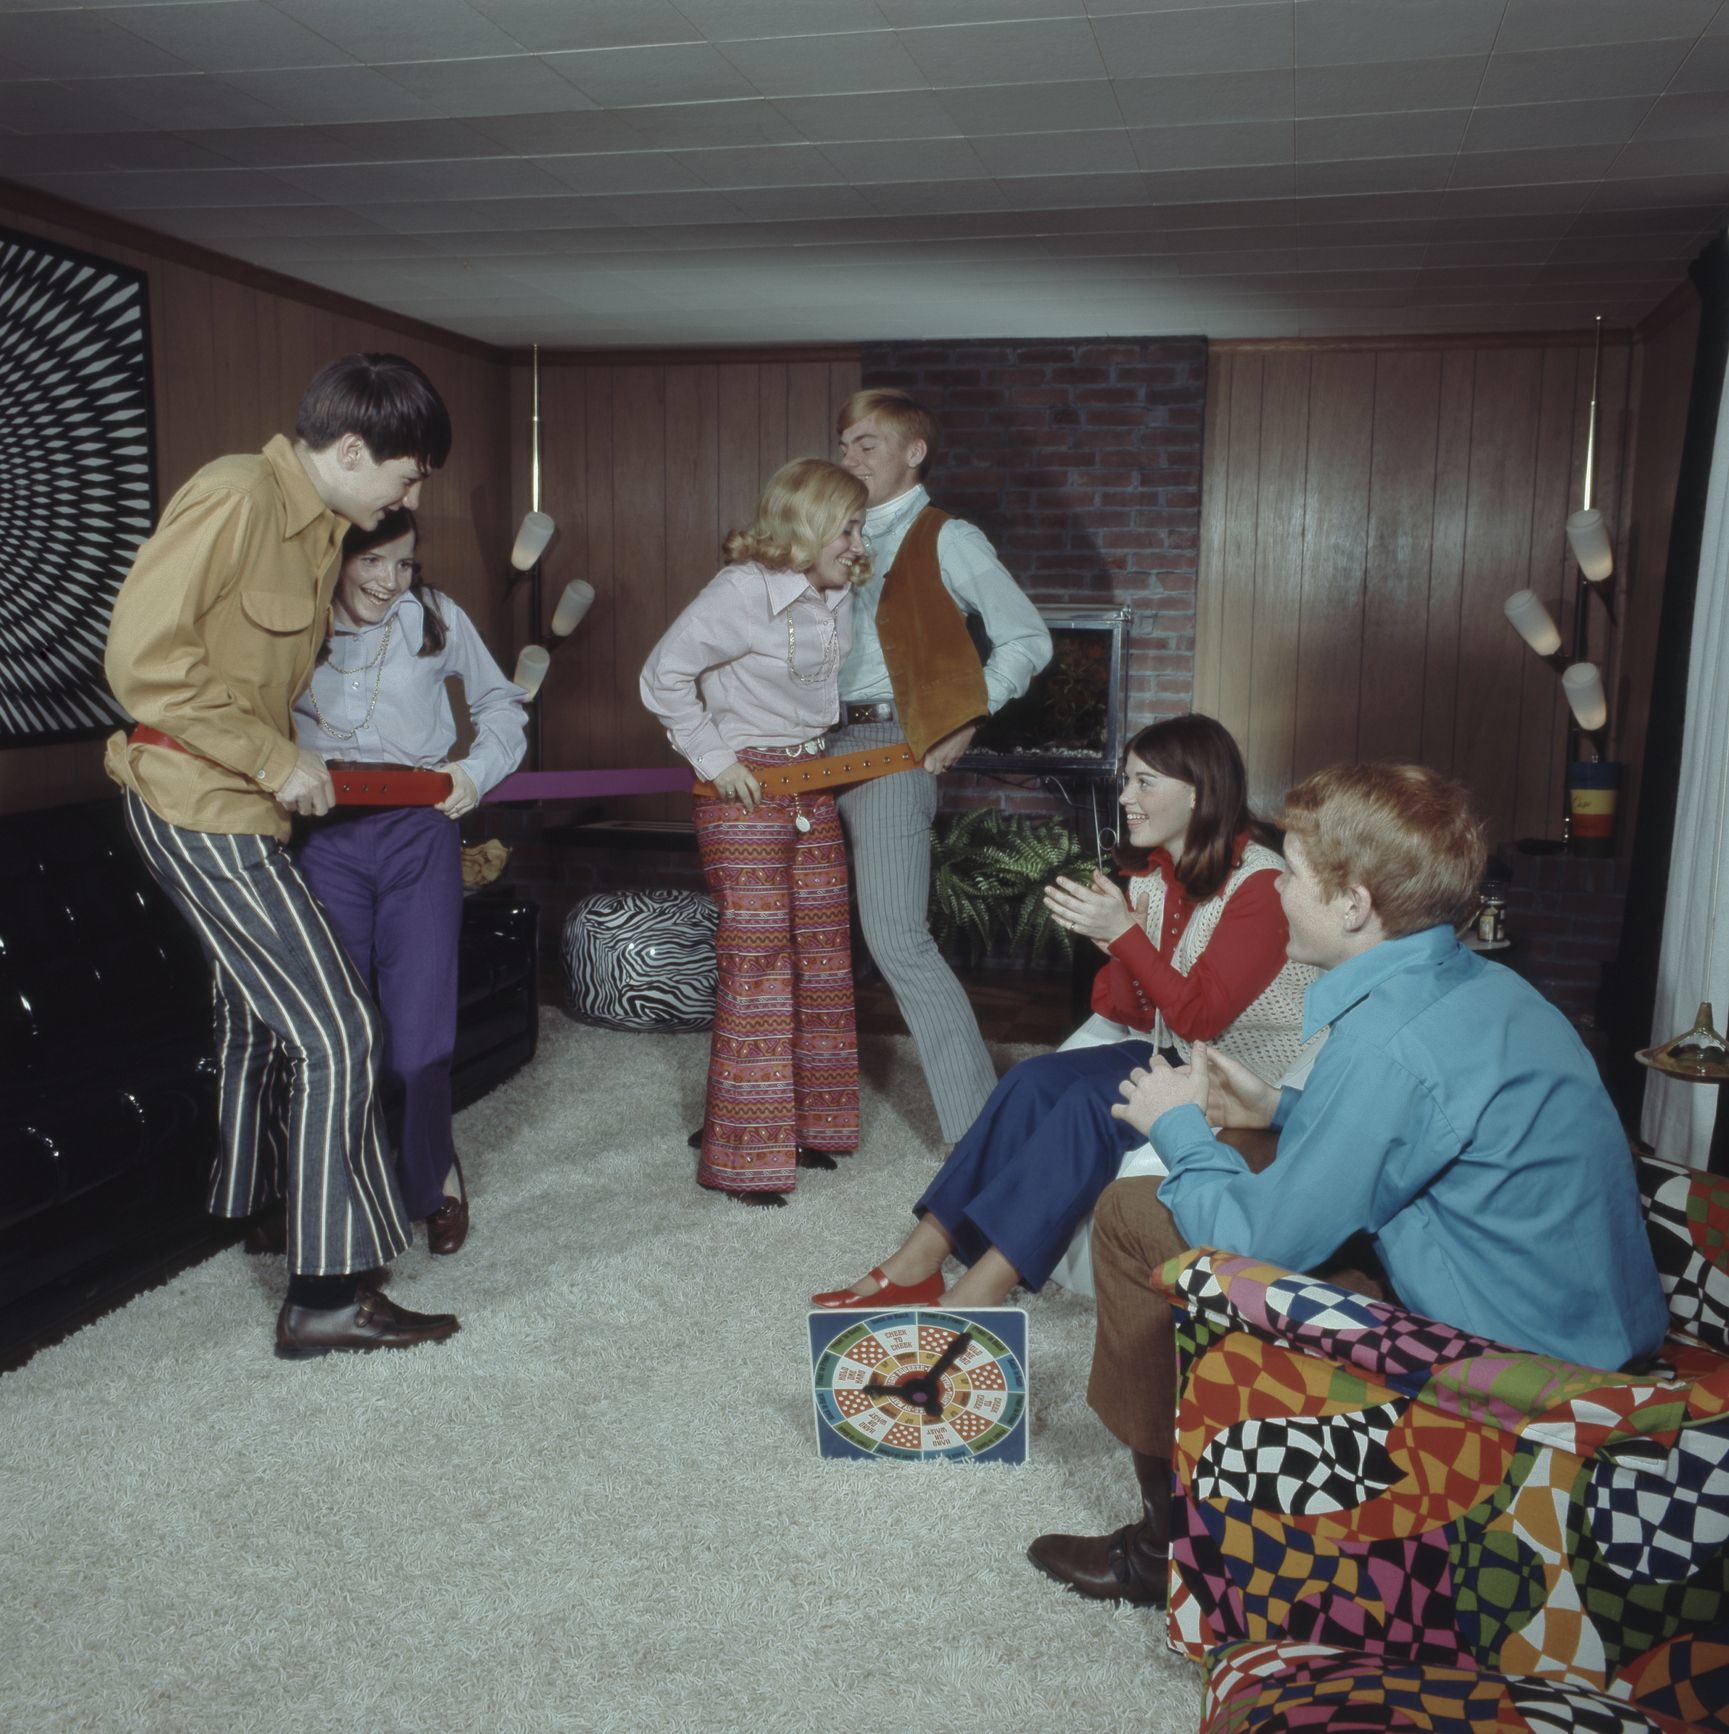 How Life As A Teen Is Different Now - Life 50 Years Ago